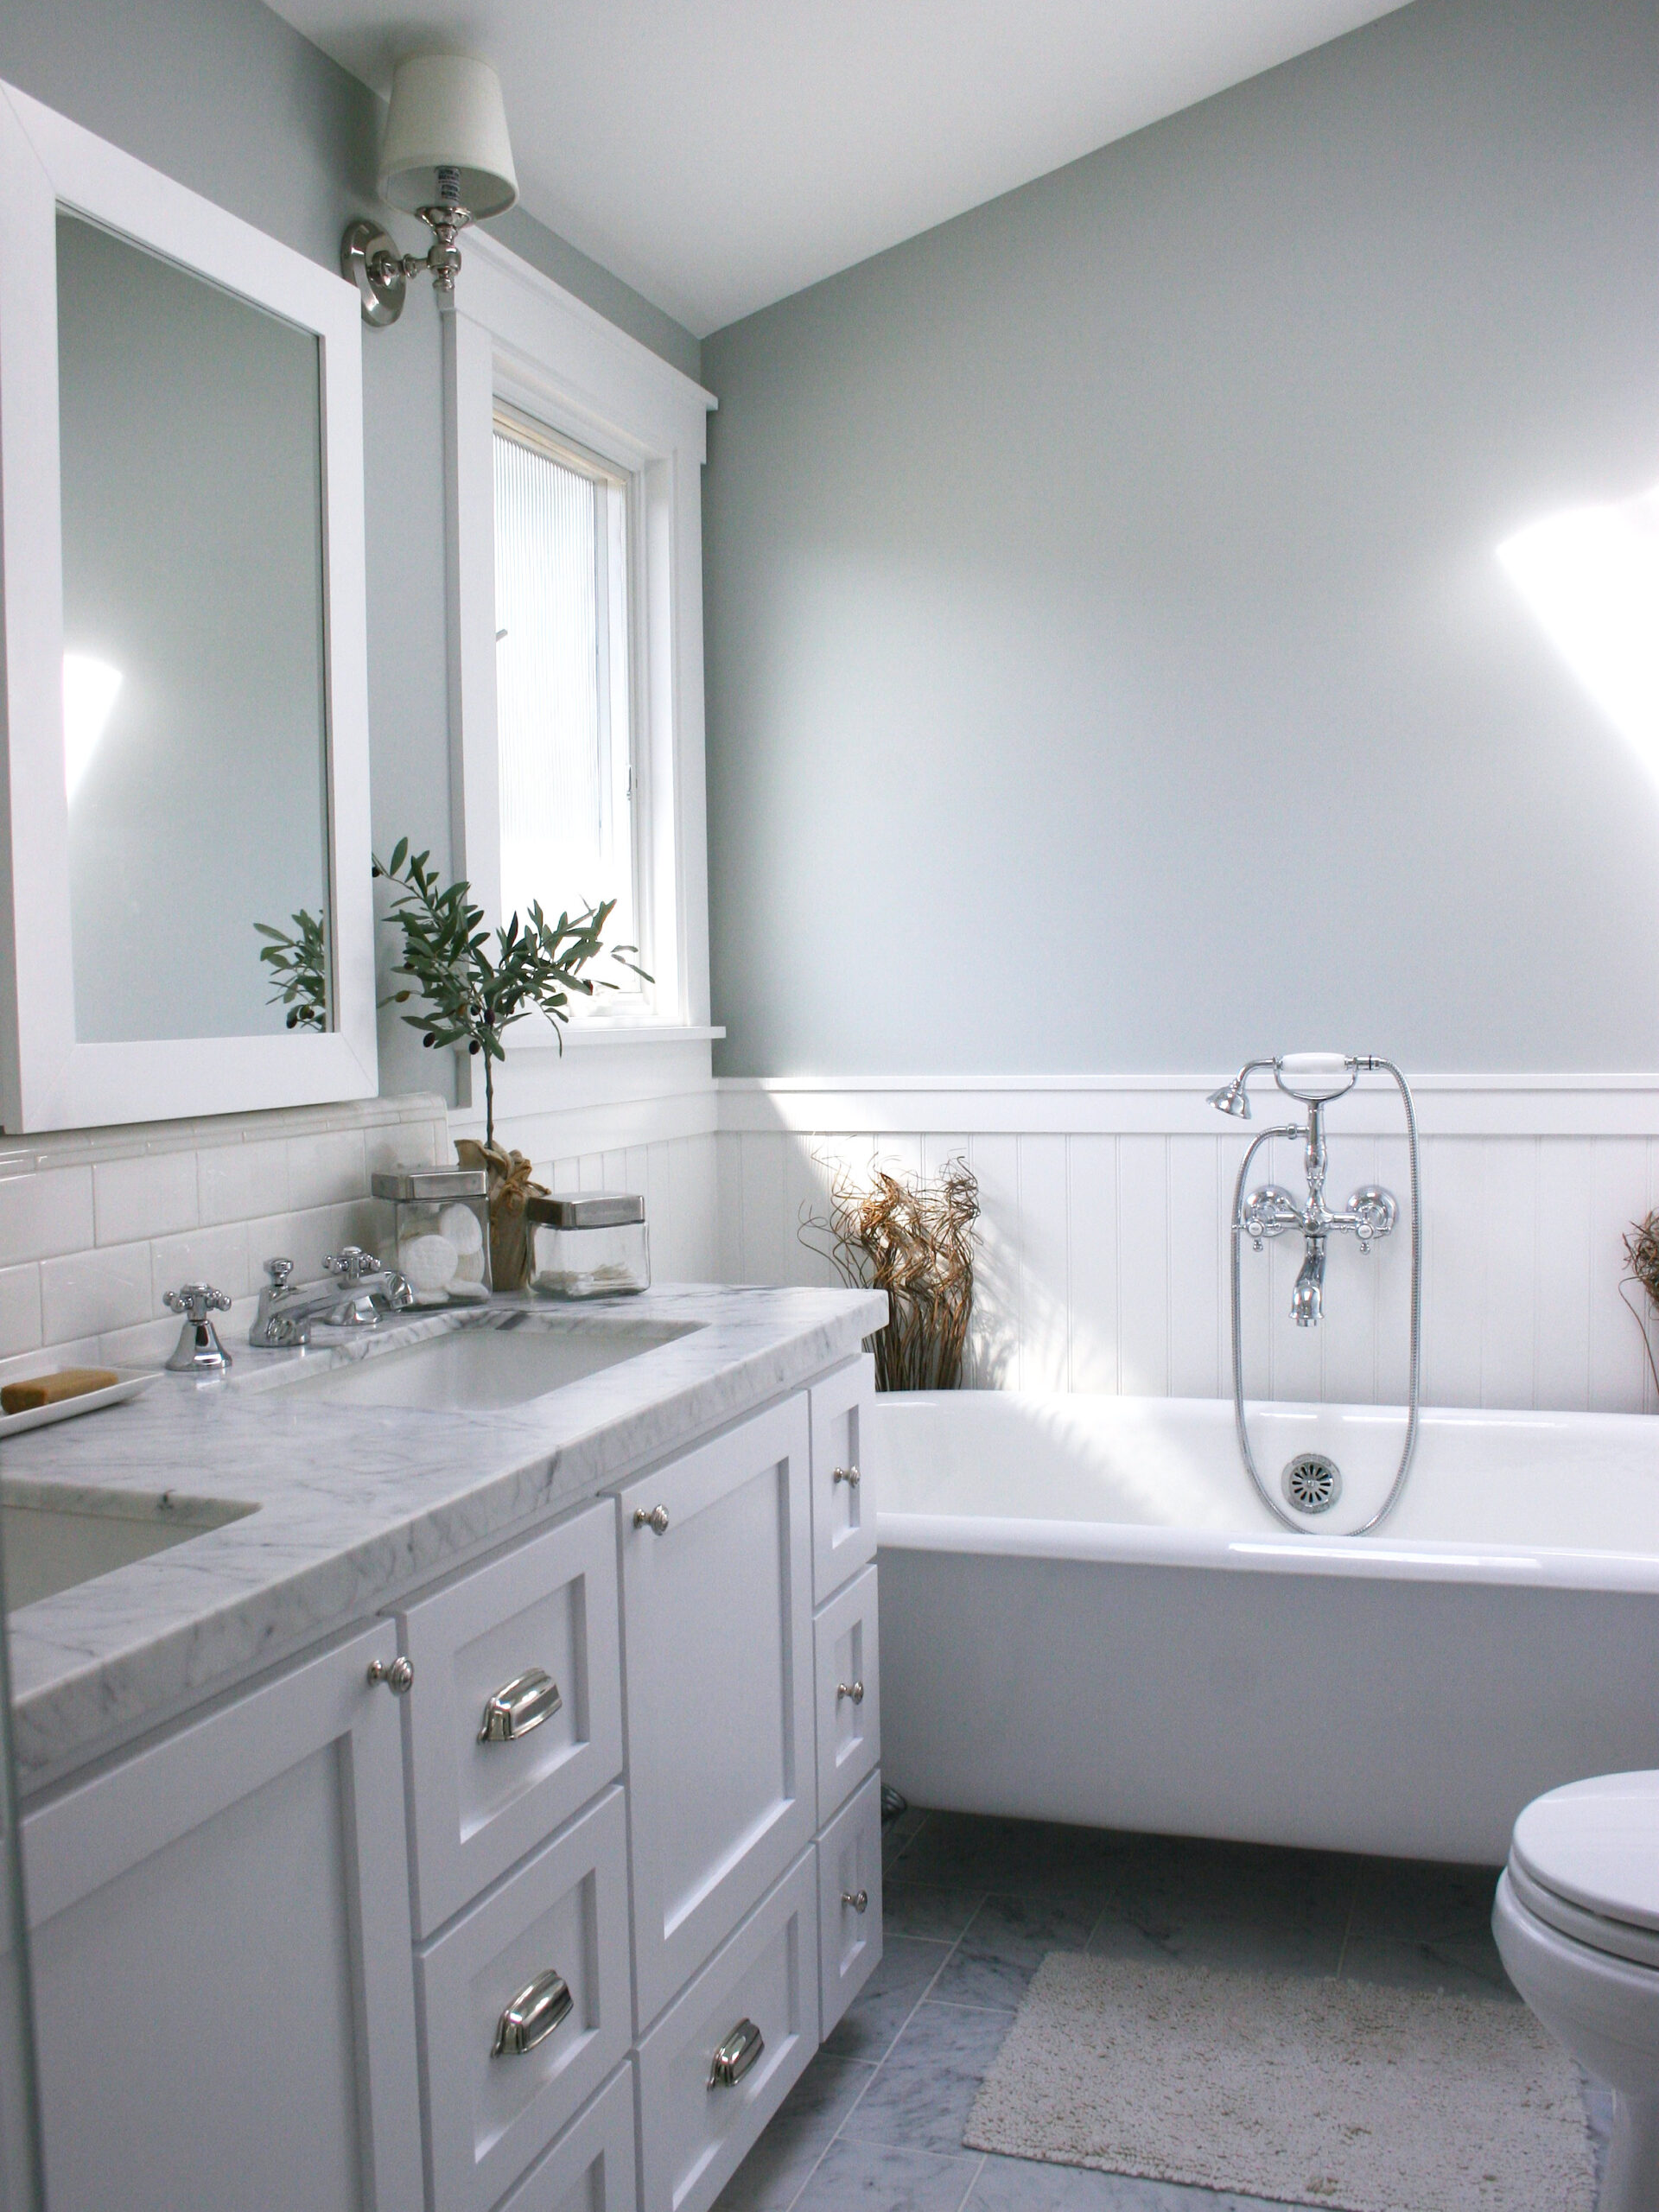 The Timeless Elegance of Light Gray Bathroom Cabinets A Perfect Choice for Any Décor